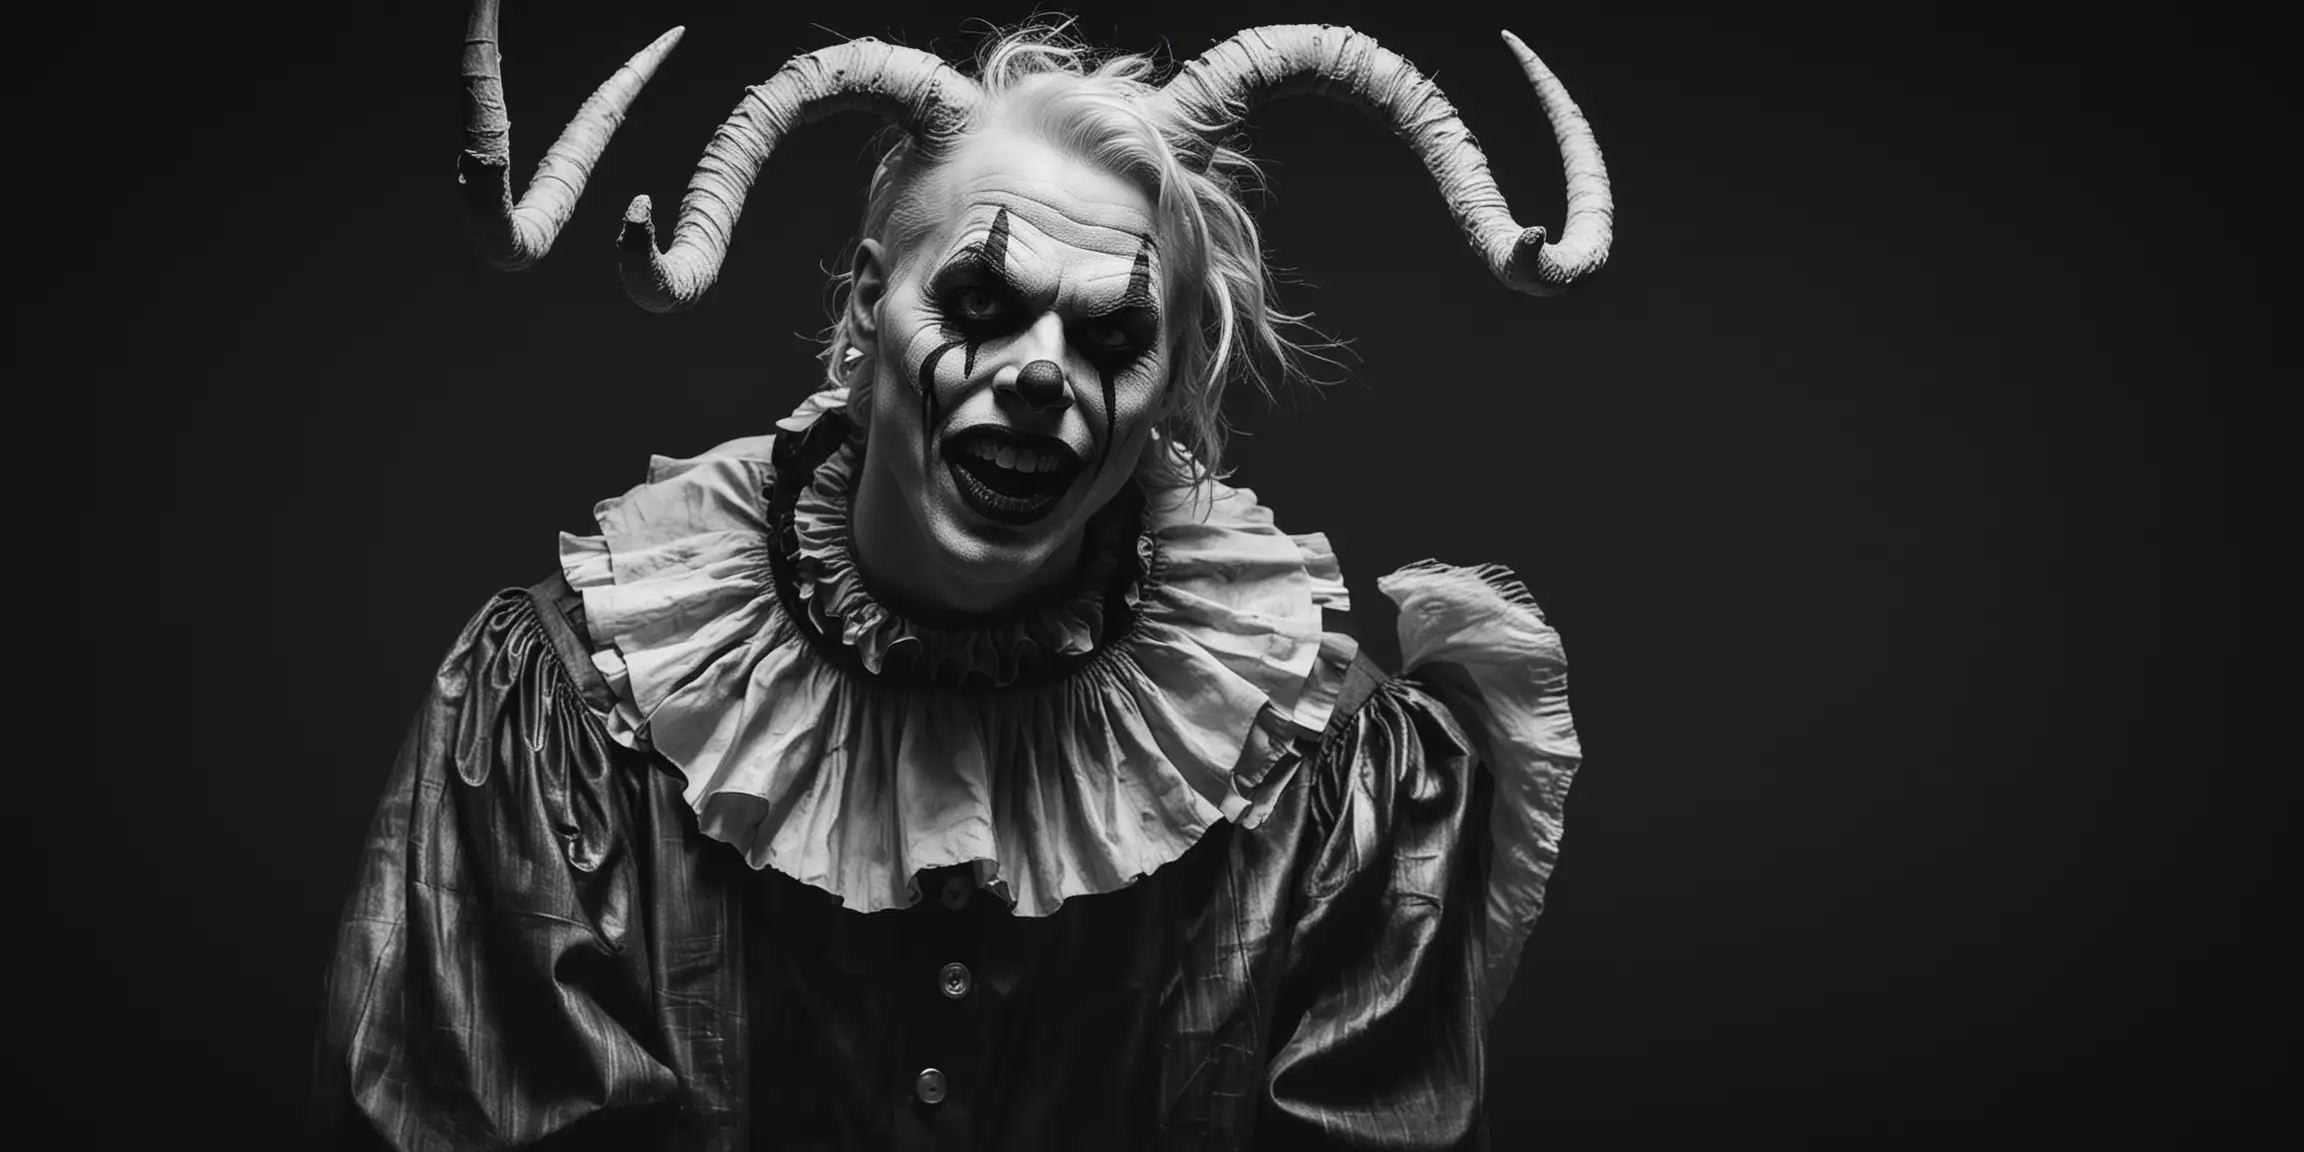 Surreal Portrait Dark Clown with Long Wavy Horns and Creepy White Face Paint